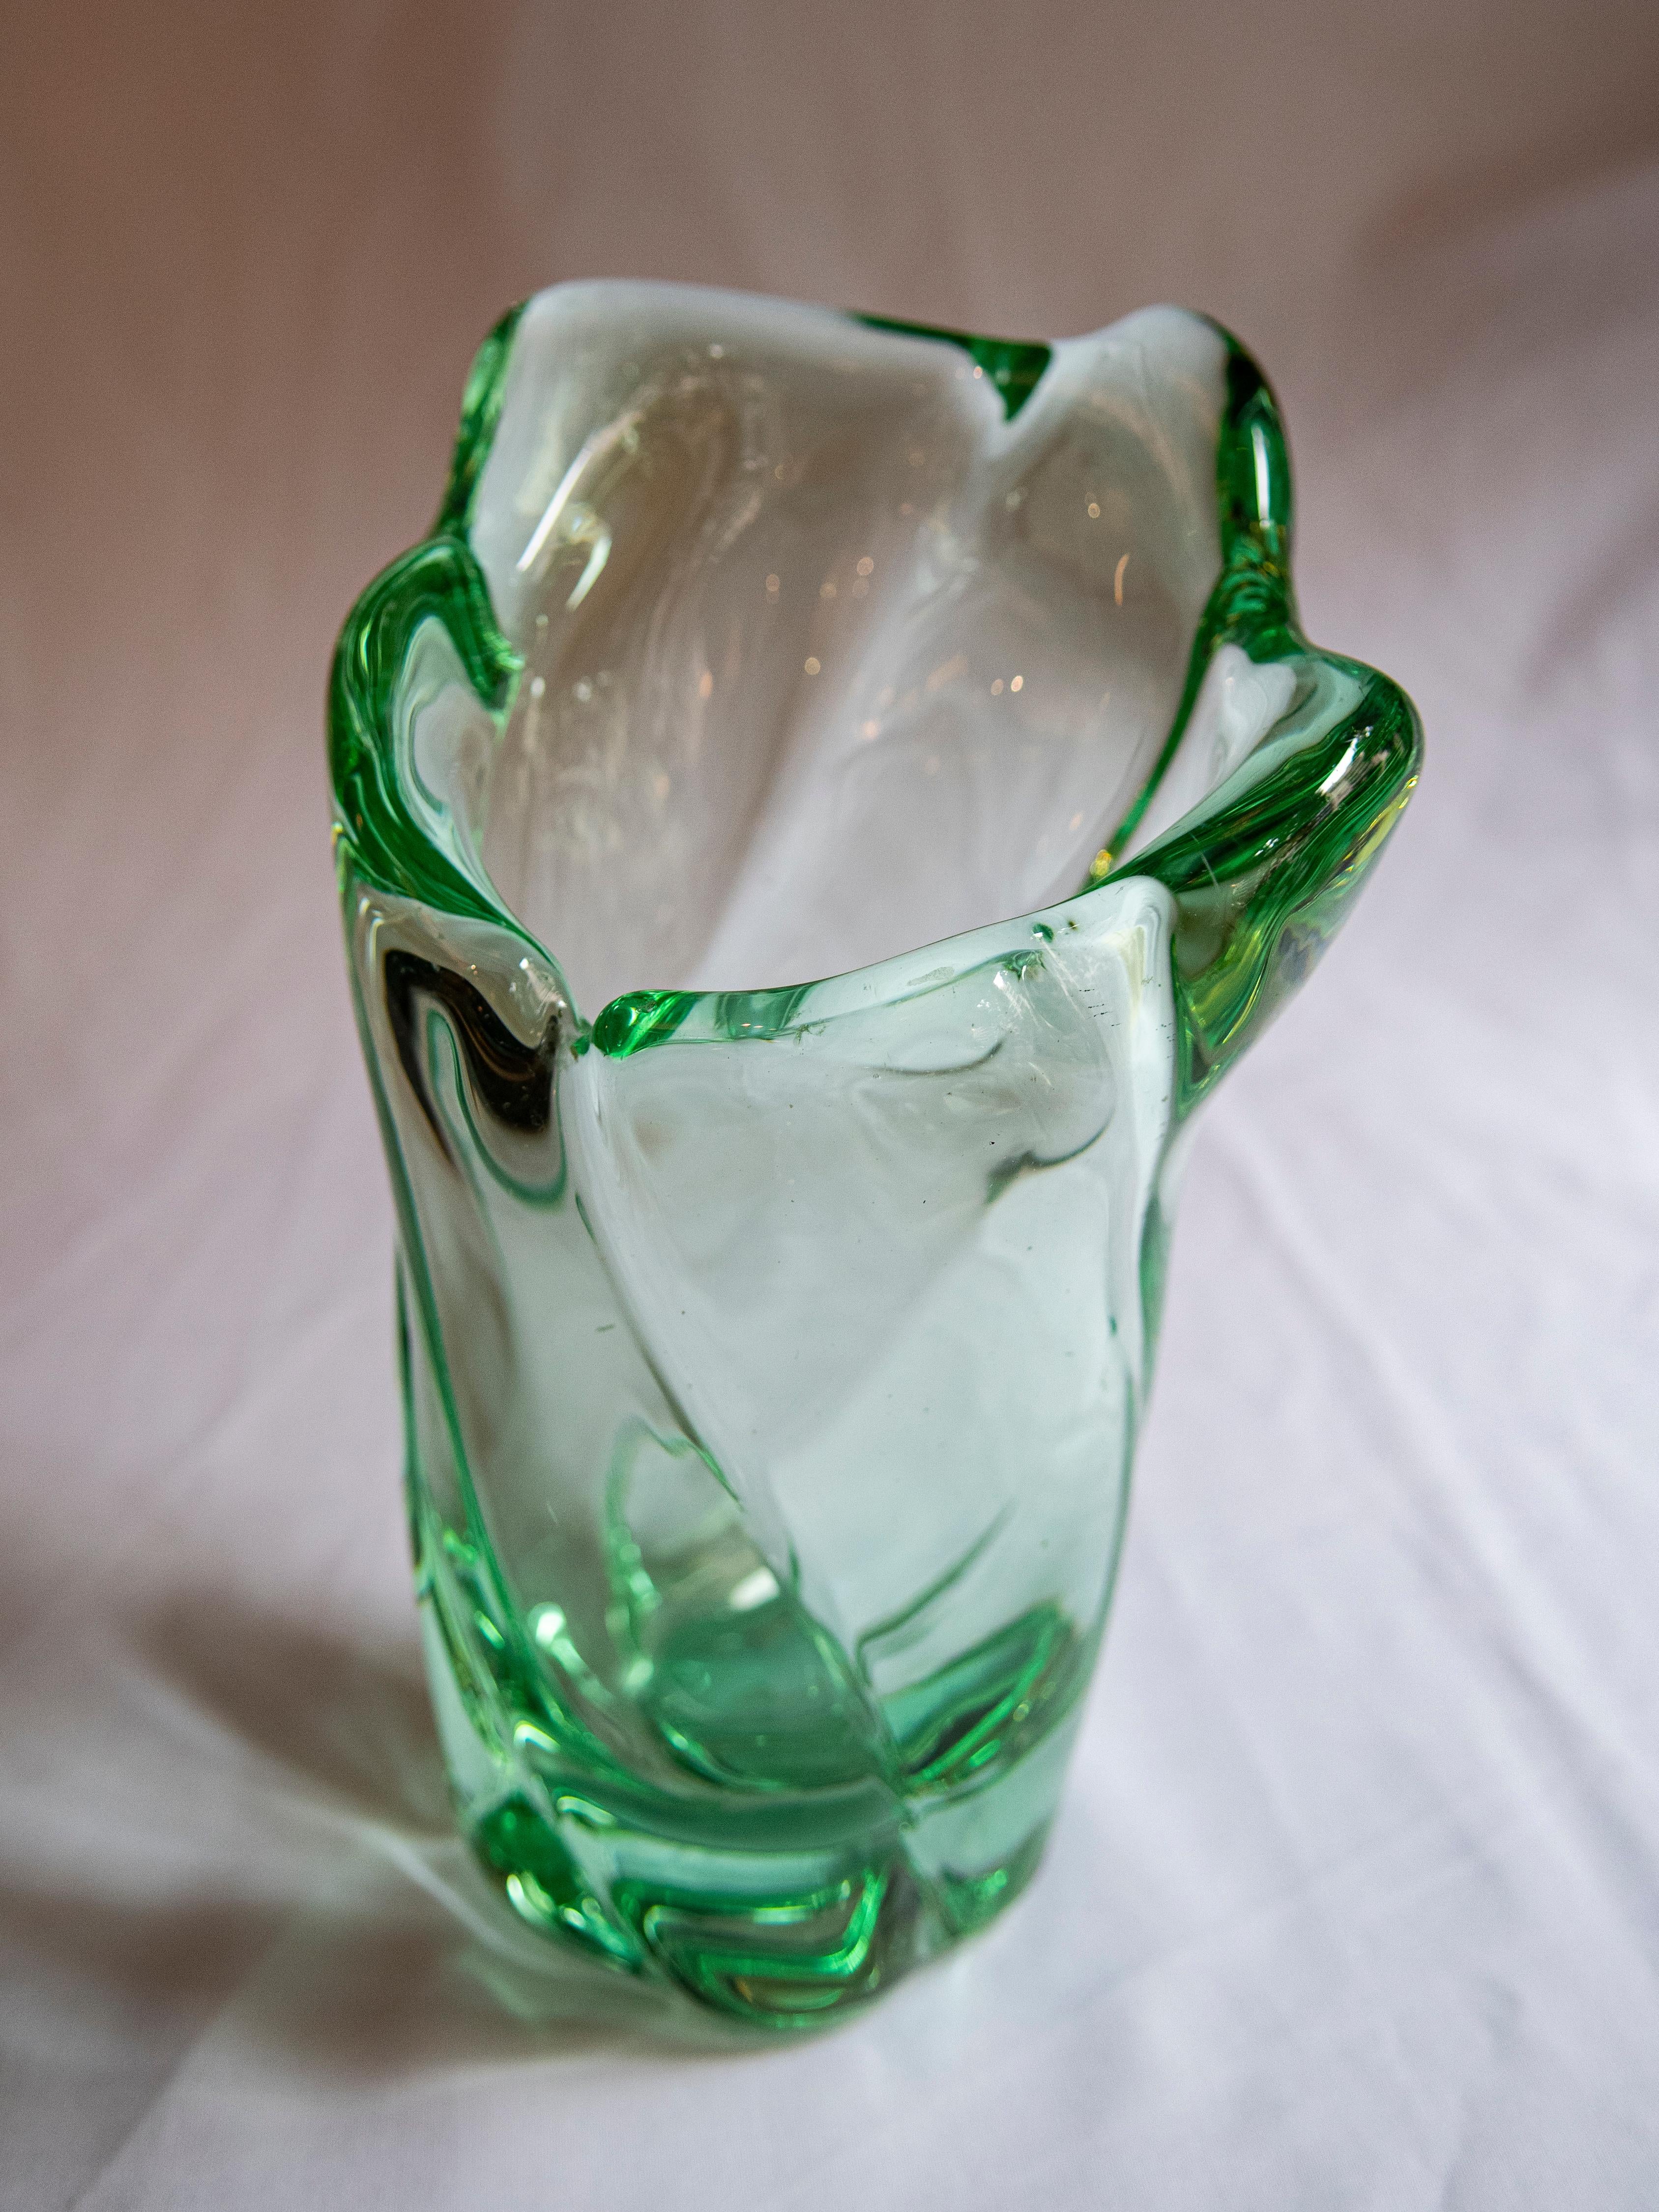 Daum Nancy transparent green vase with irregular form, circa 1950.
Signed on the base in intaglio with the cross of lorraine, France.
   